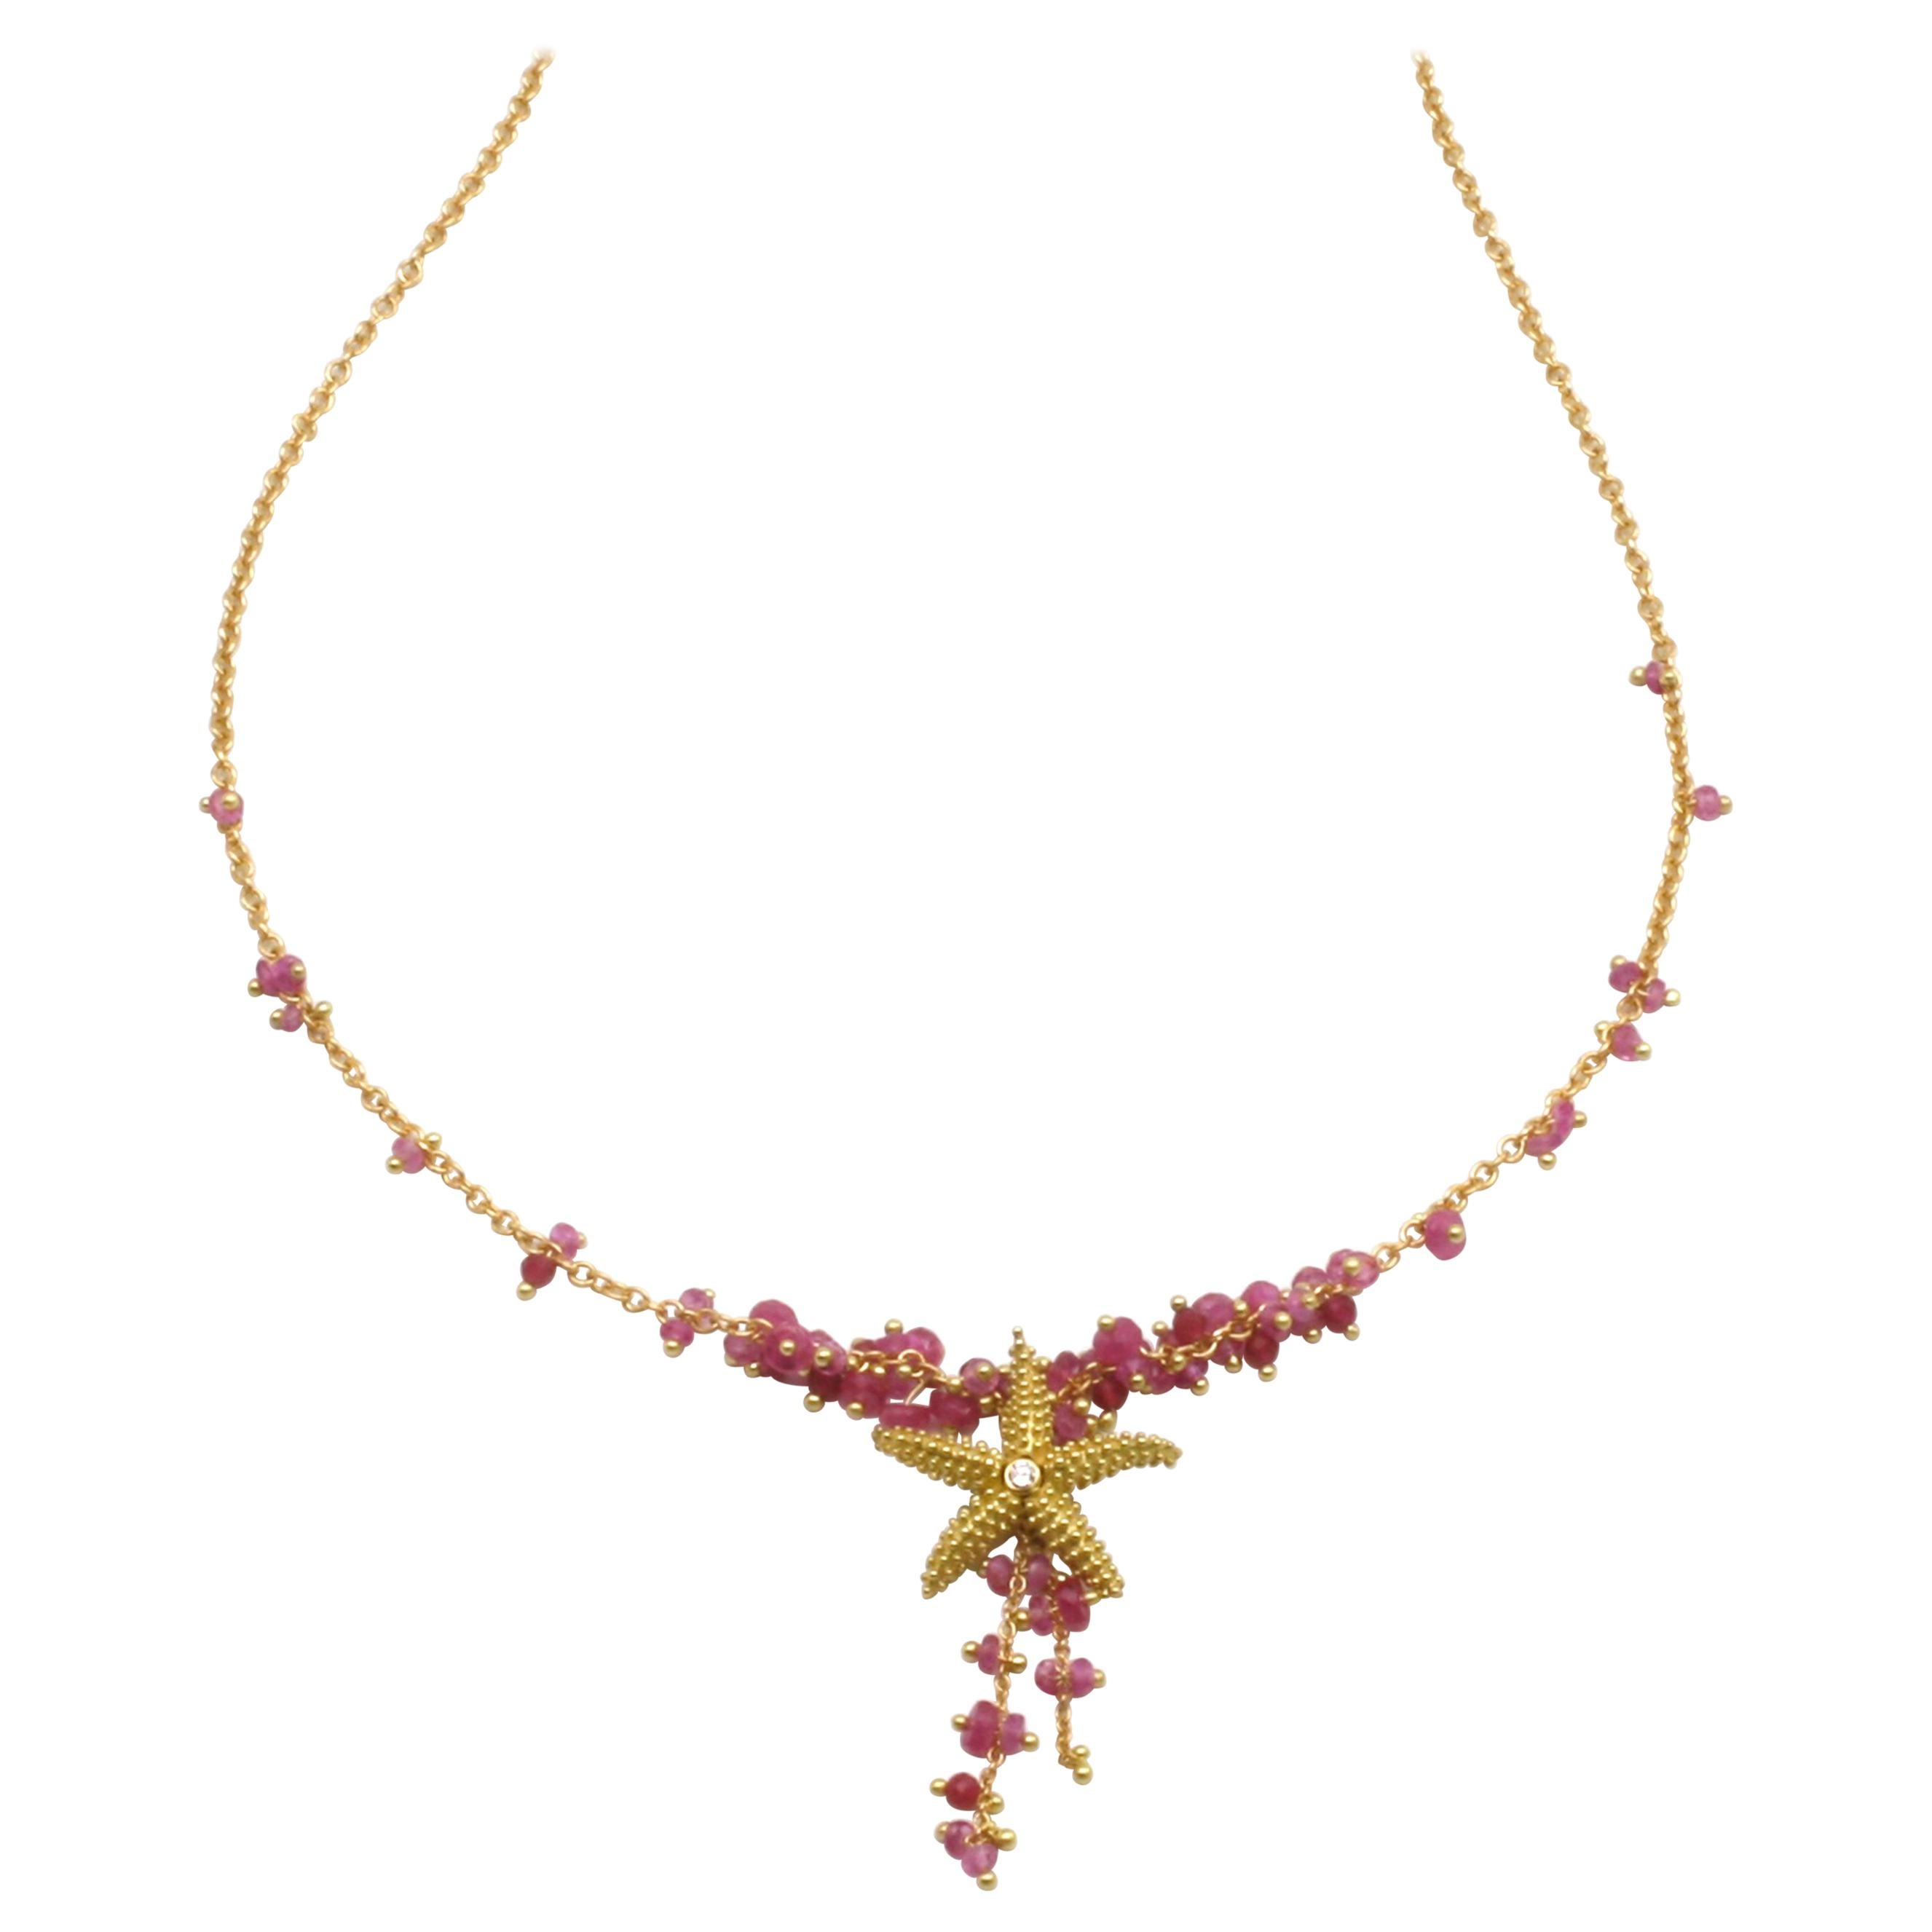 Diana Kim England Seastar Necklace with Pink Sapphire Faceted Beads in 18k Gold For Sale